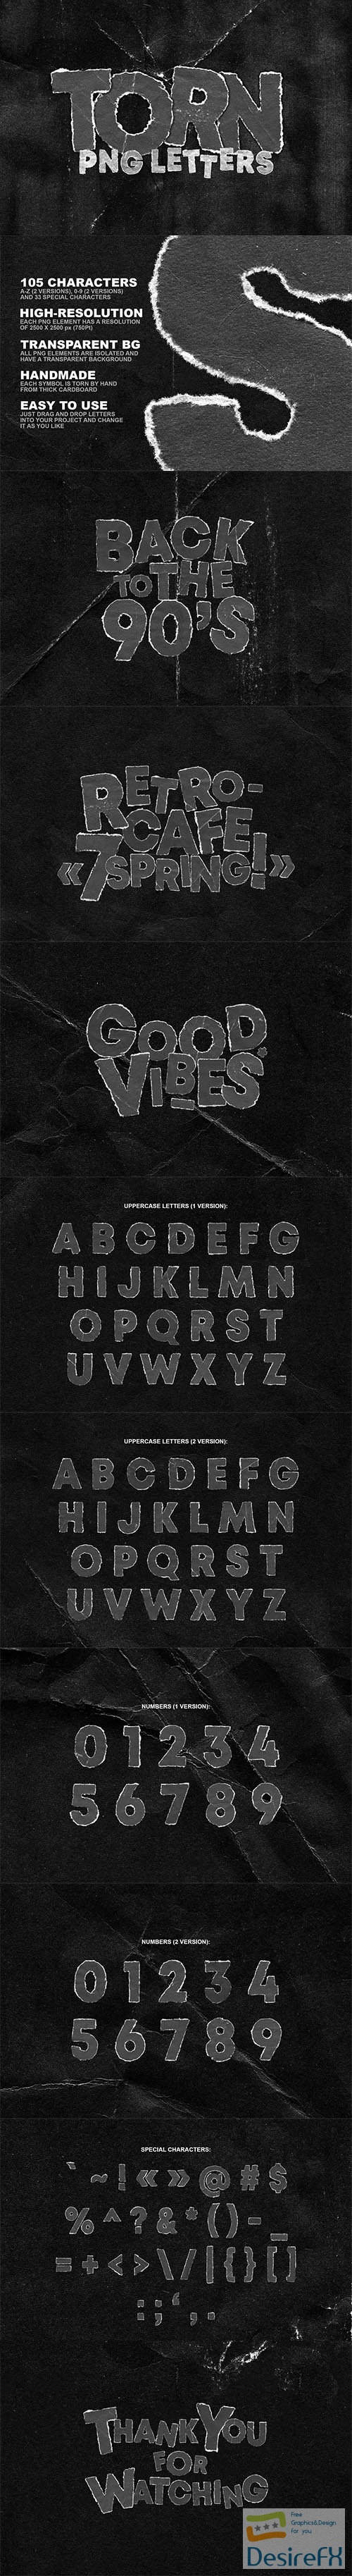 CreativeMarket - TORN PNG LETTERS PACK 6110497